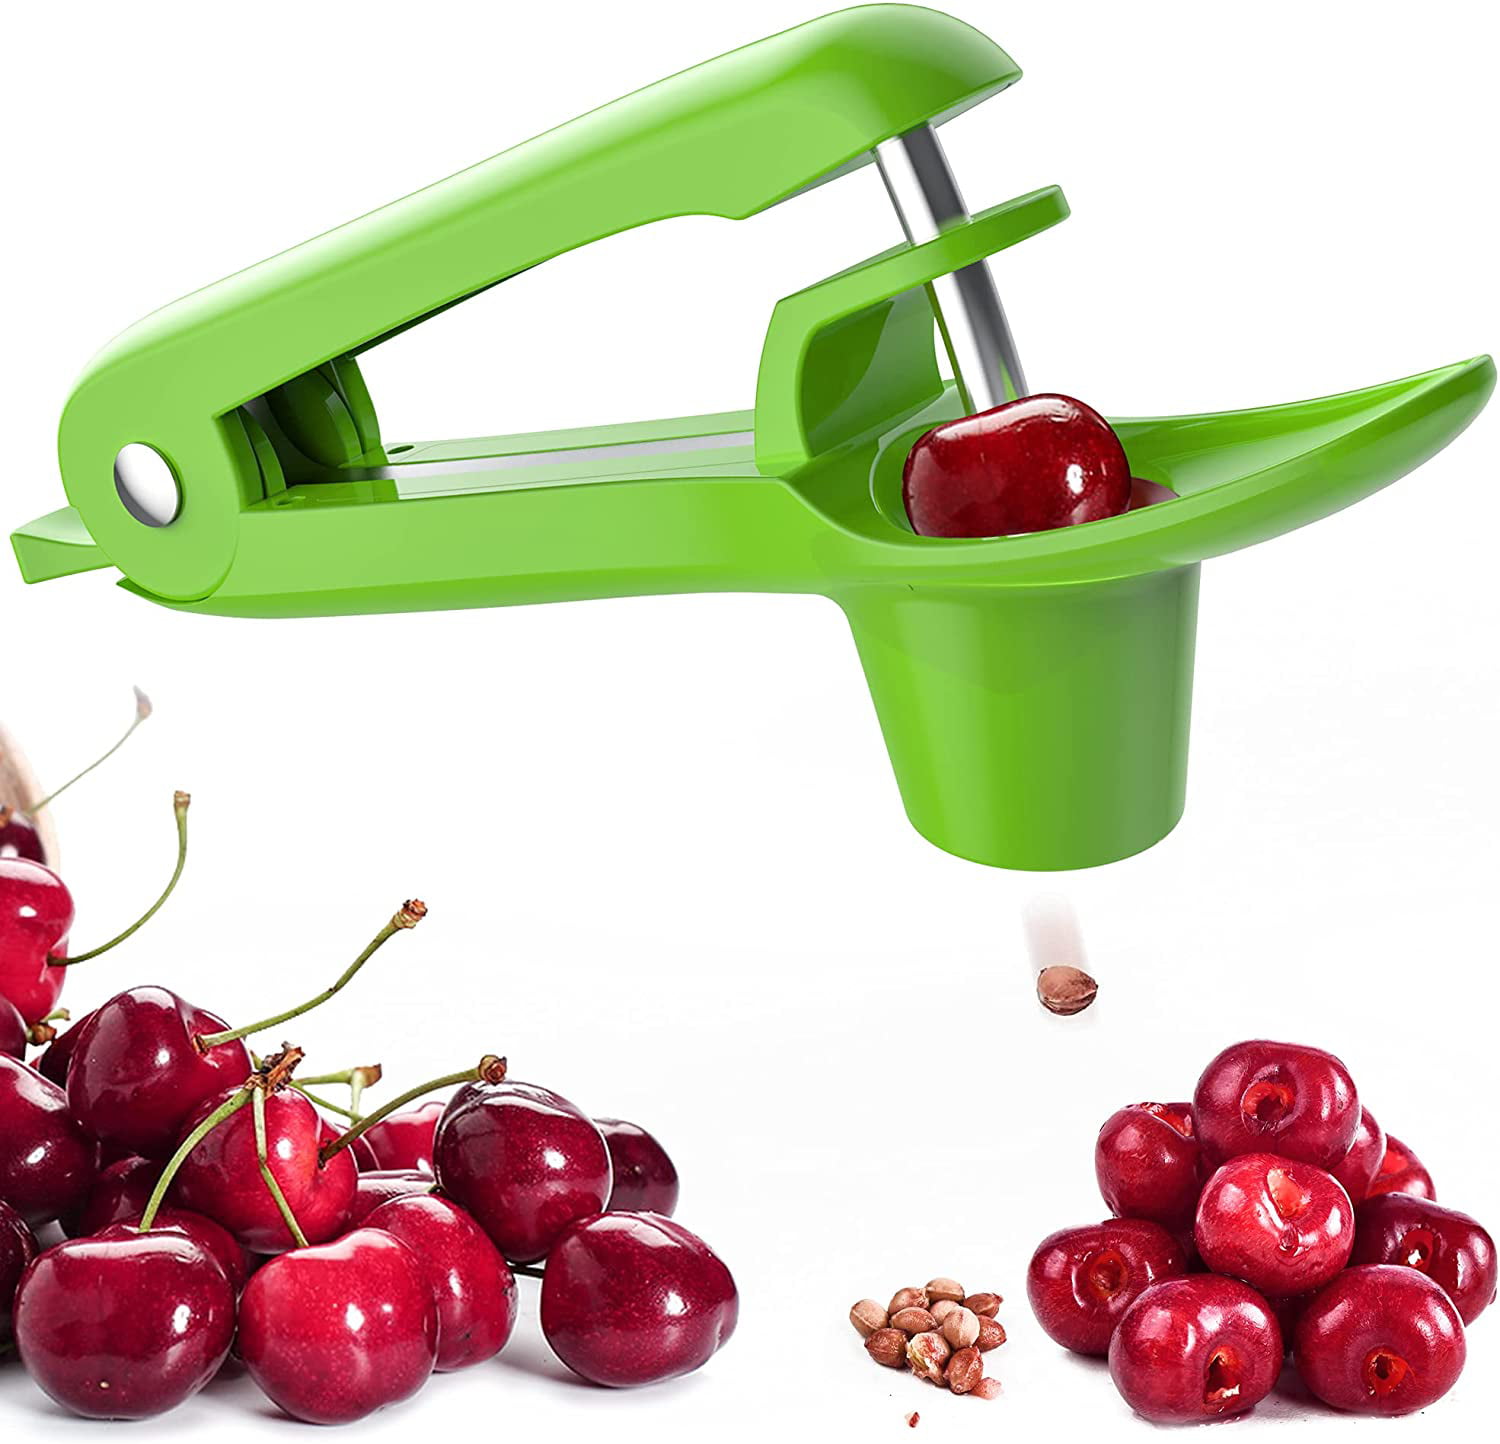 Cherry Pit Remover Tool Pit Remover for Cherries Olive Pit Remover Heavy-Duty Cherry Seed Remover Cherry Corer Pitter Tool for Cherries Jam Stainless Steel / Durable Cherry Pitter Tool 